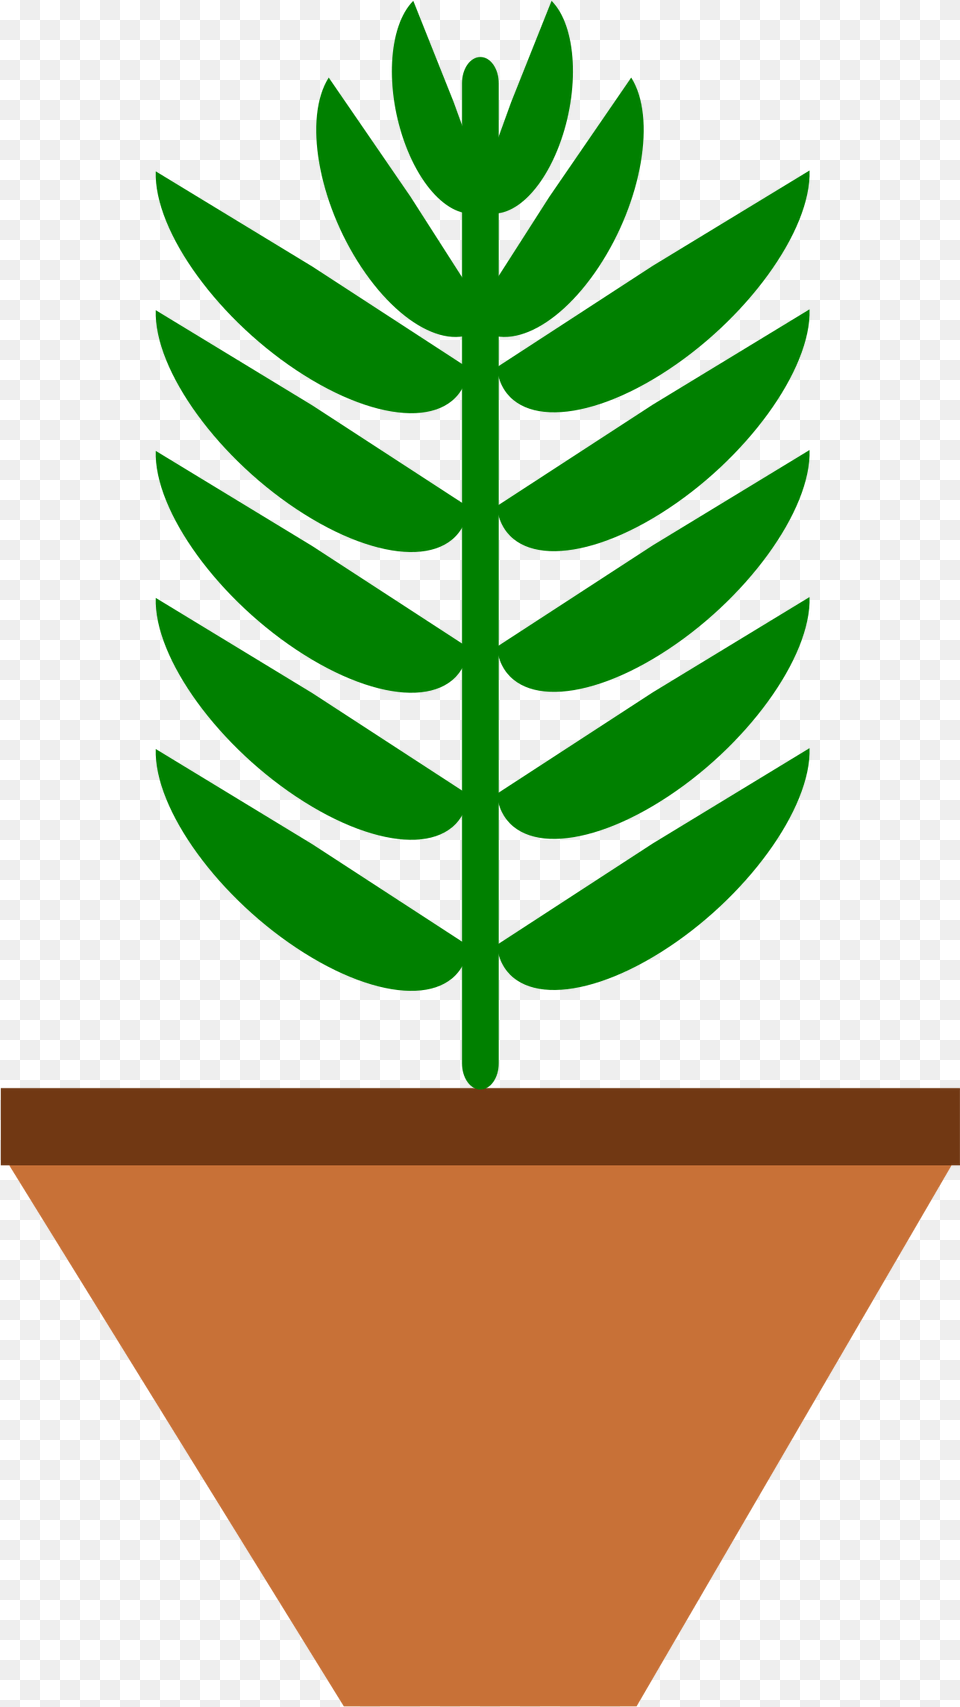 Potted Plant Leaves Only 3 Color With Space On Pot Pot Plant Clip Art, Tree, Potted Plant, Leaf, Conifer Free Png